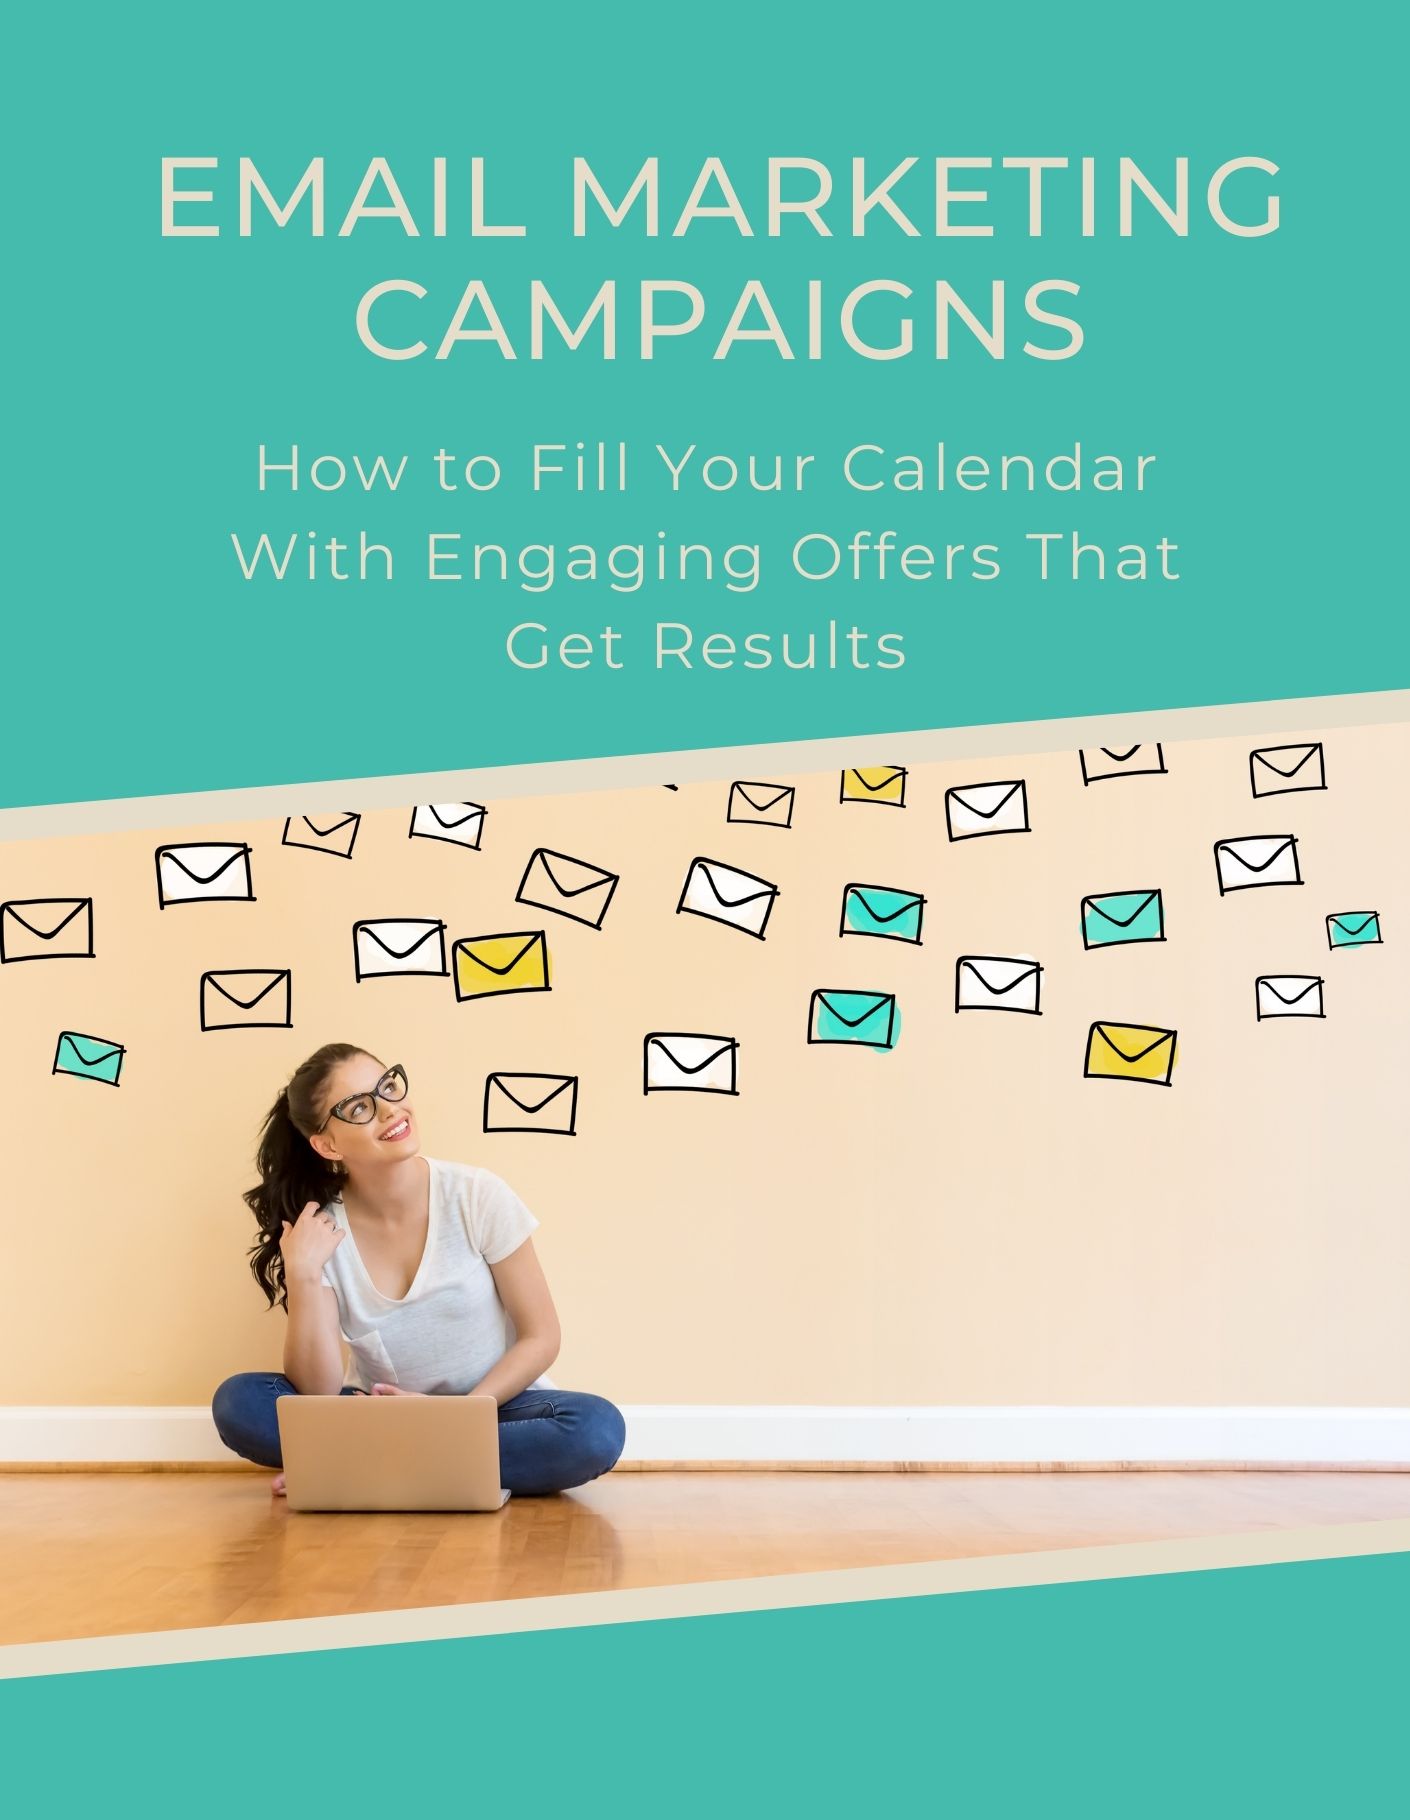 Email Marketing Campaigns Cover